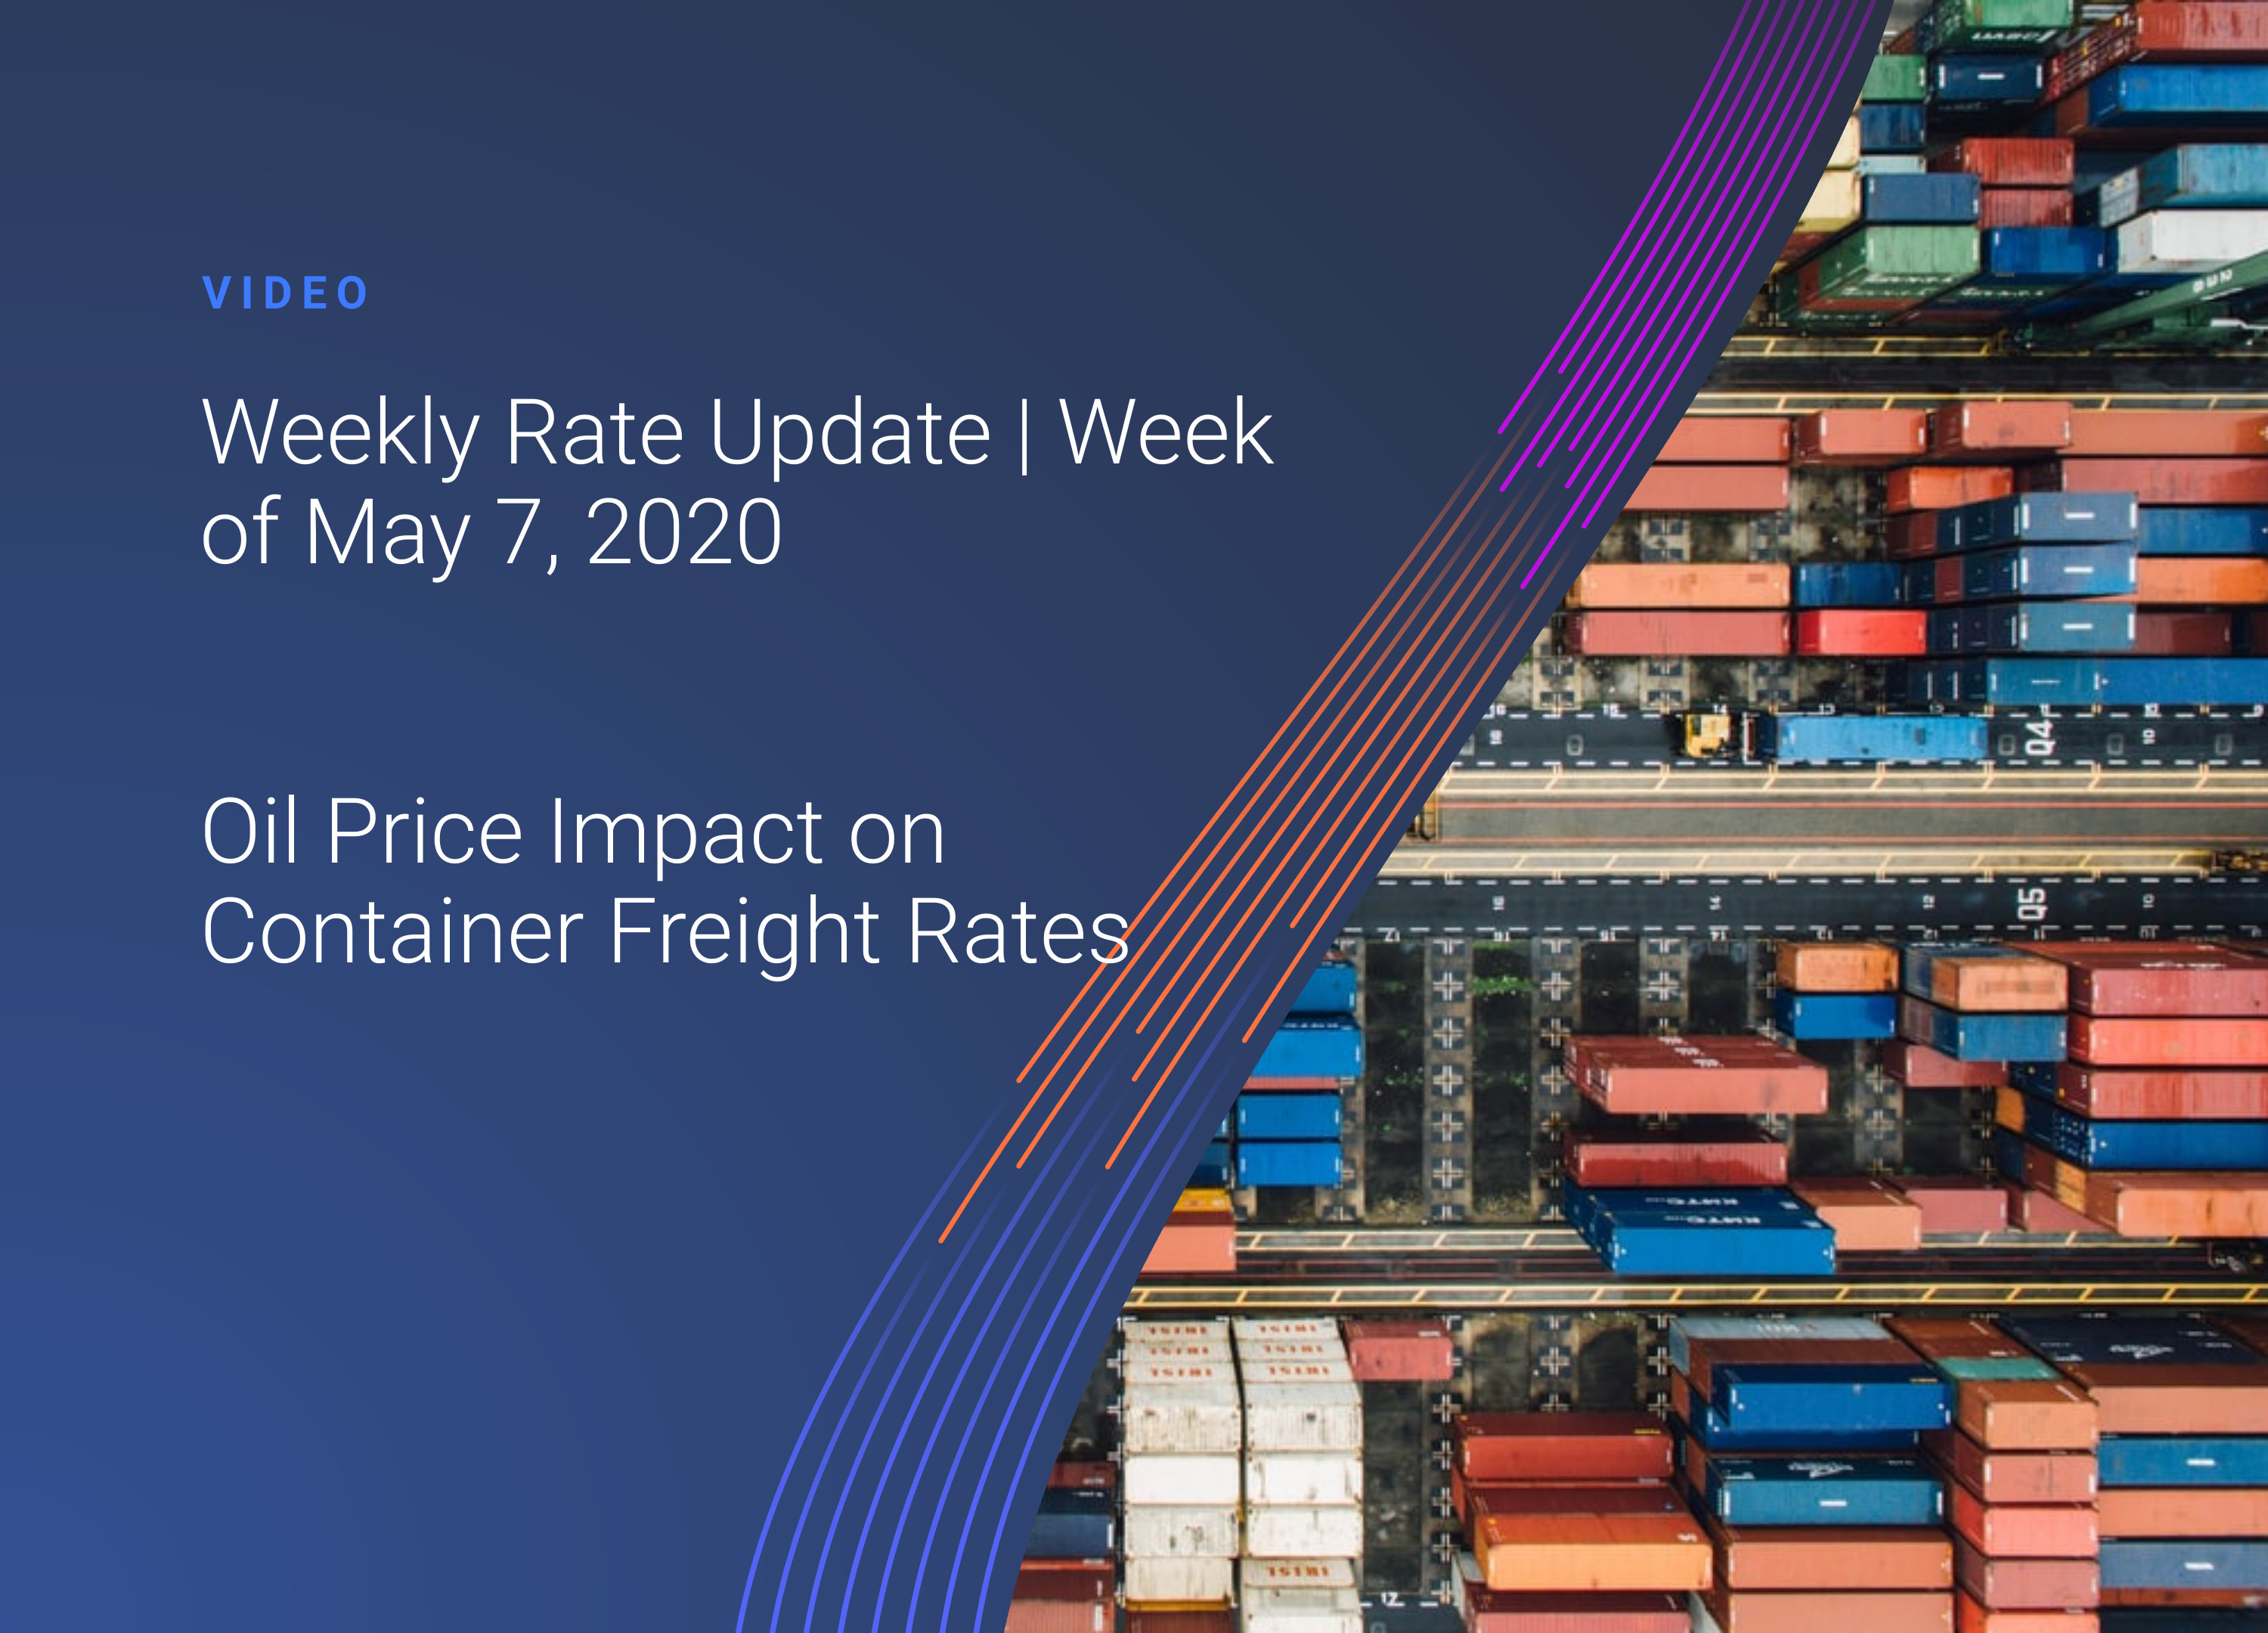 Weekly Rate Update: W19 Oil Price Impact on Container Freight Rates